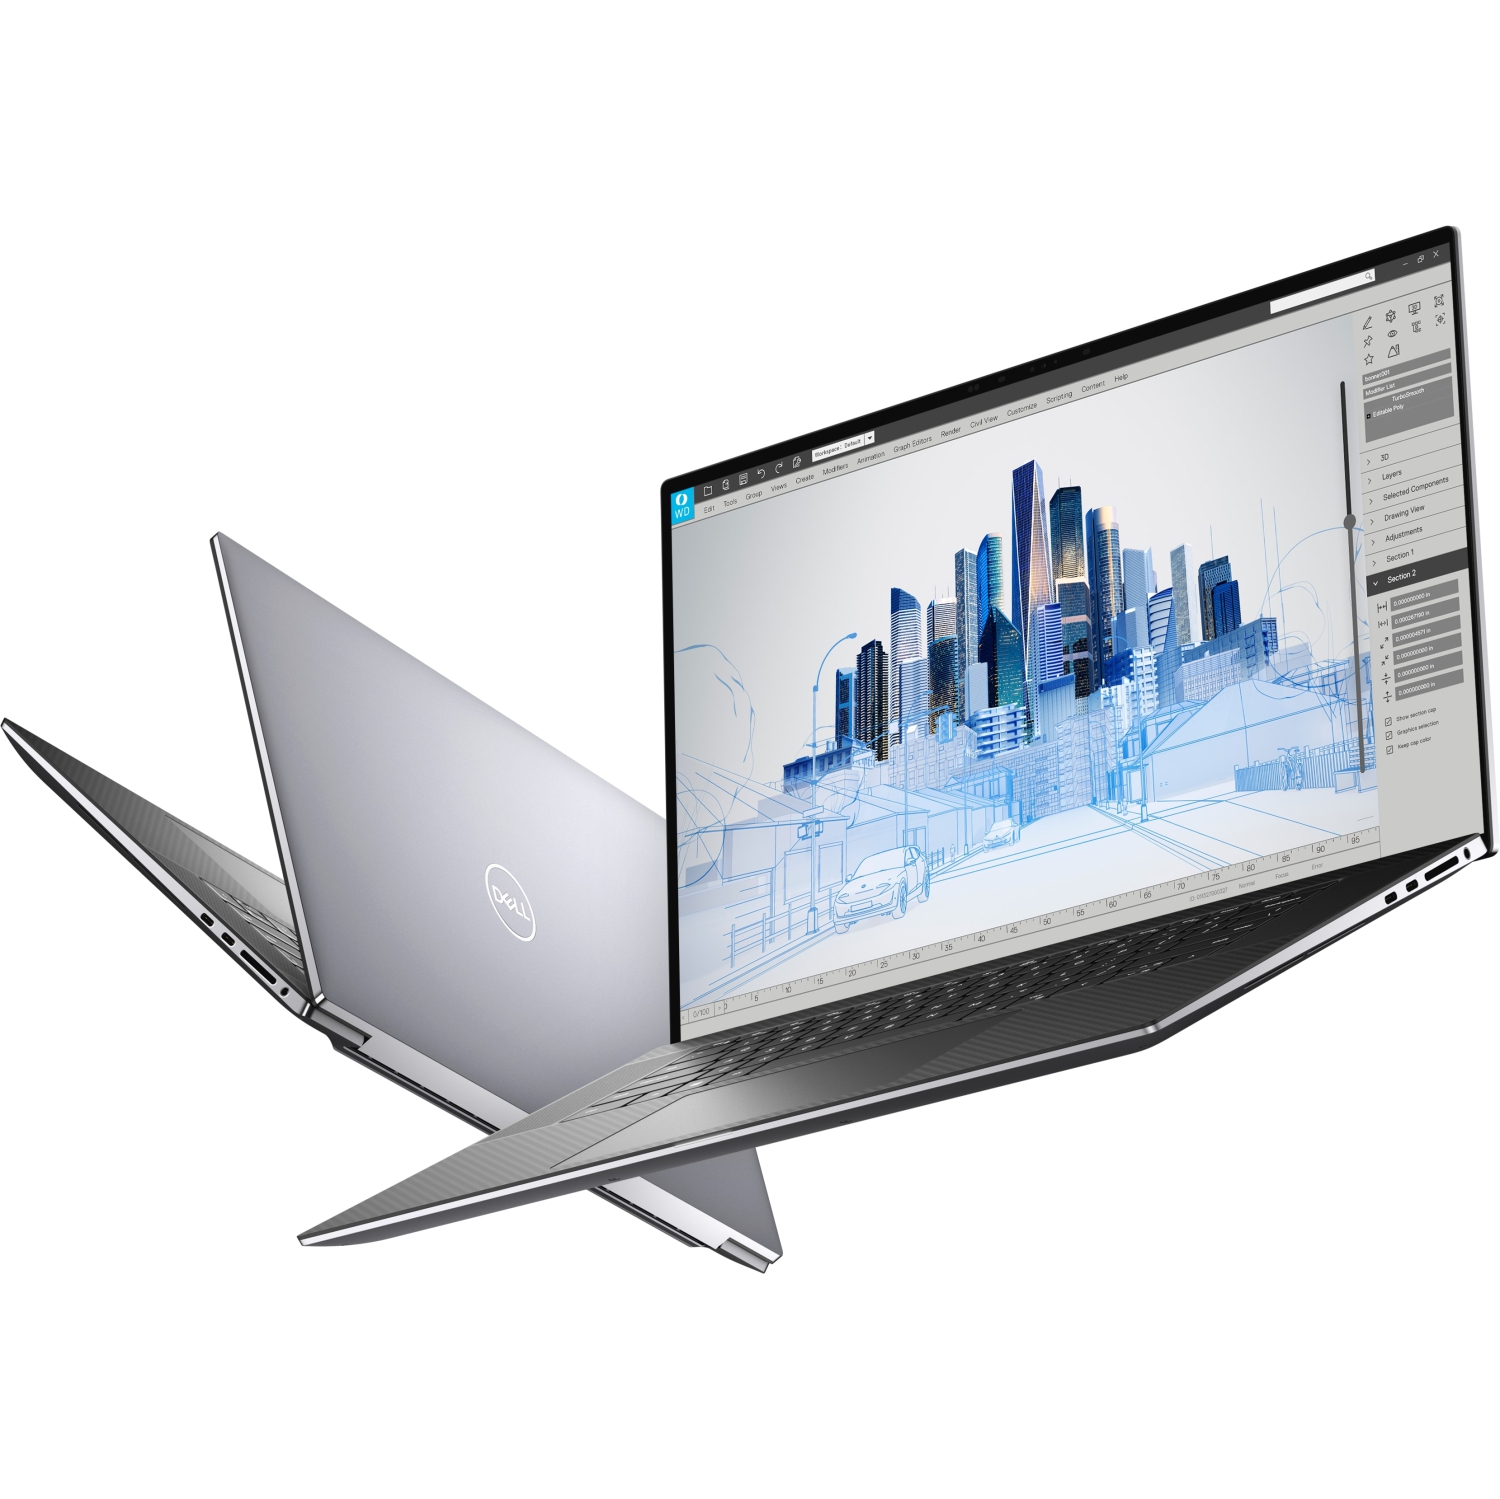 Refurbished (Excellent) – Dell Precision 5000 5760 Workstation Laptop (2021) | 17" FHD+ | Core i7 - 256GB SSD - 8GB RAM - RTX A2000 | 8 Cores @ 4.8 GHz - 11th Gen CPU